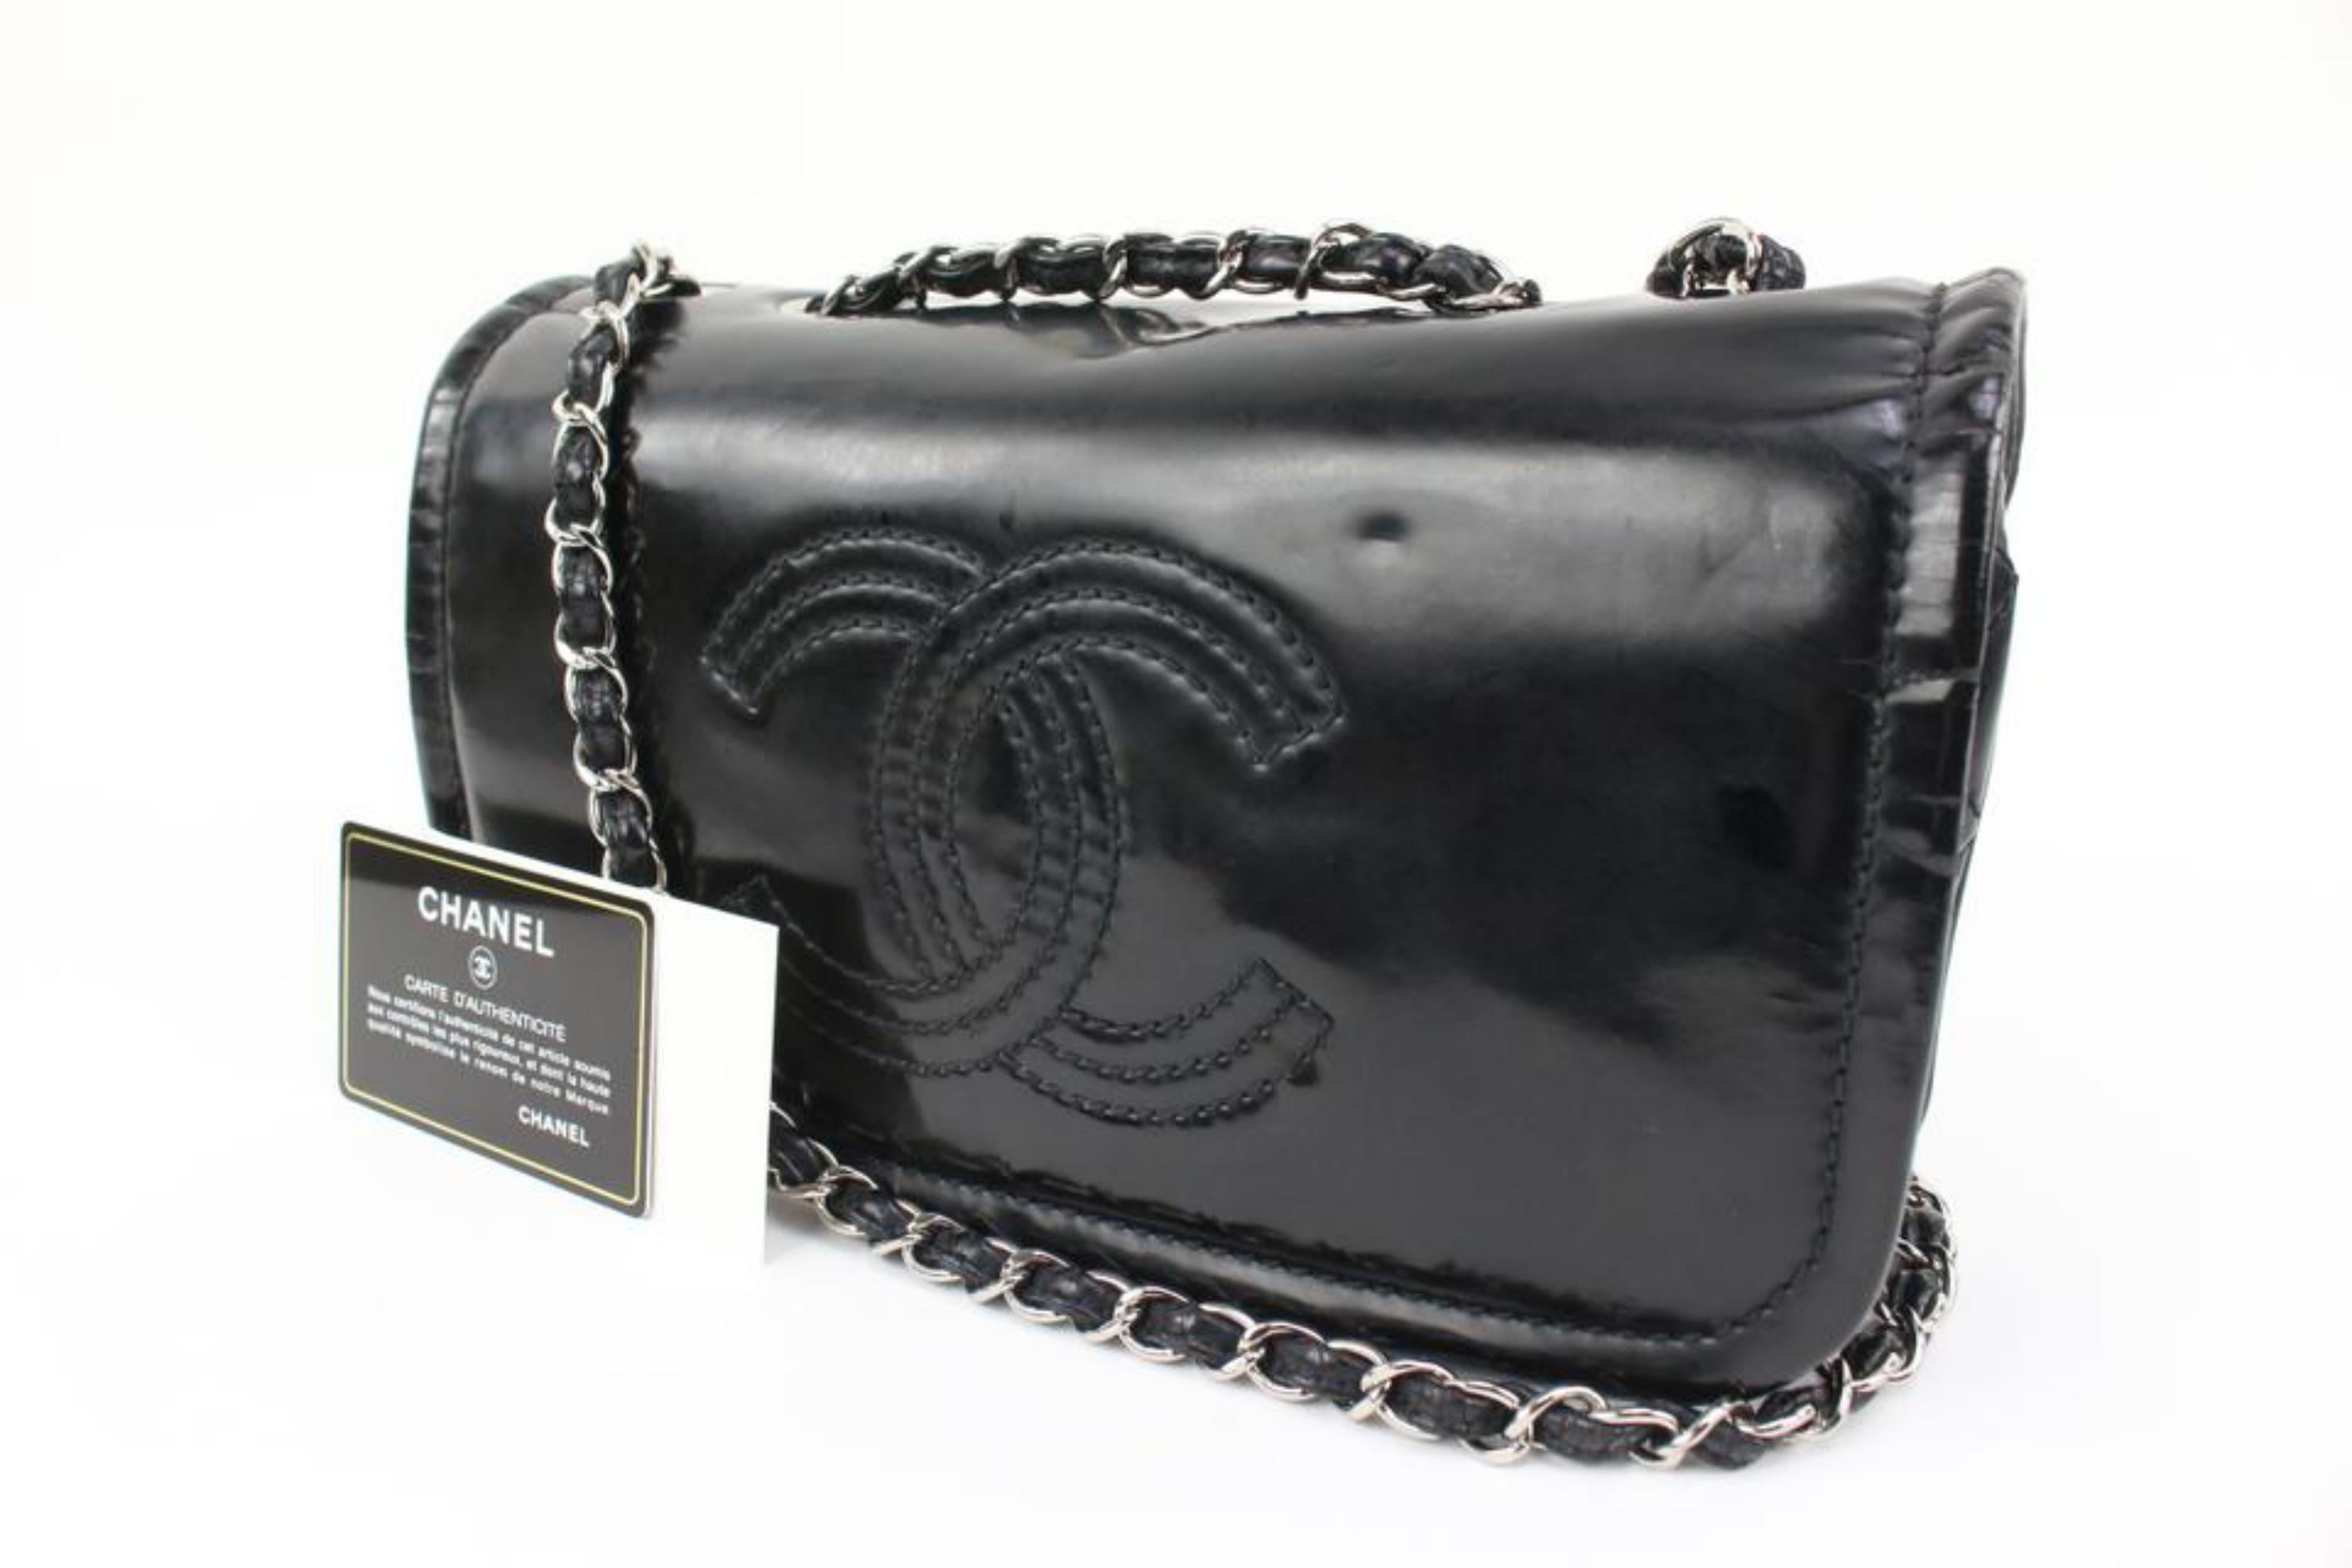 Chanel Black Patent CC Logo Chain Flap 8ck310s
Date Code/Serial Number: 14171017
Made In: Italy
Measurements: Length:  10.5